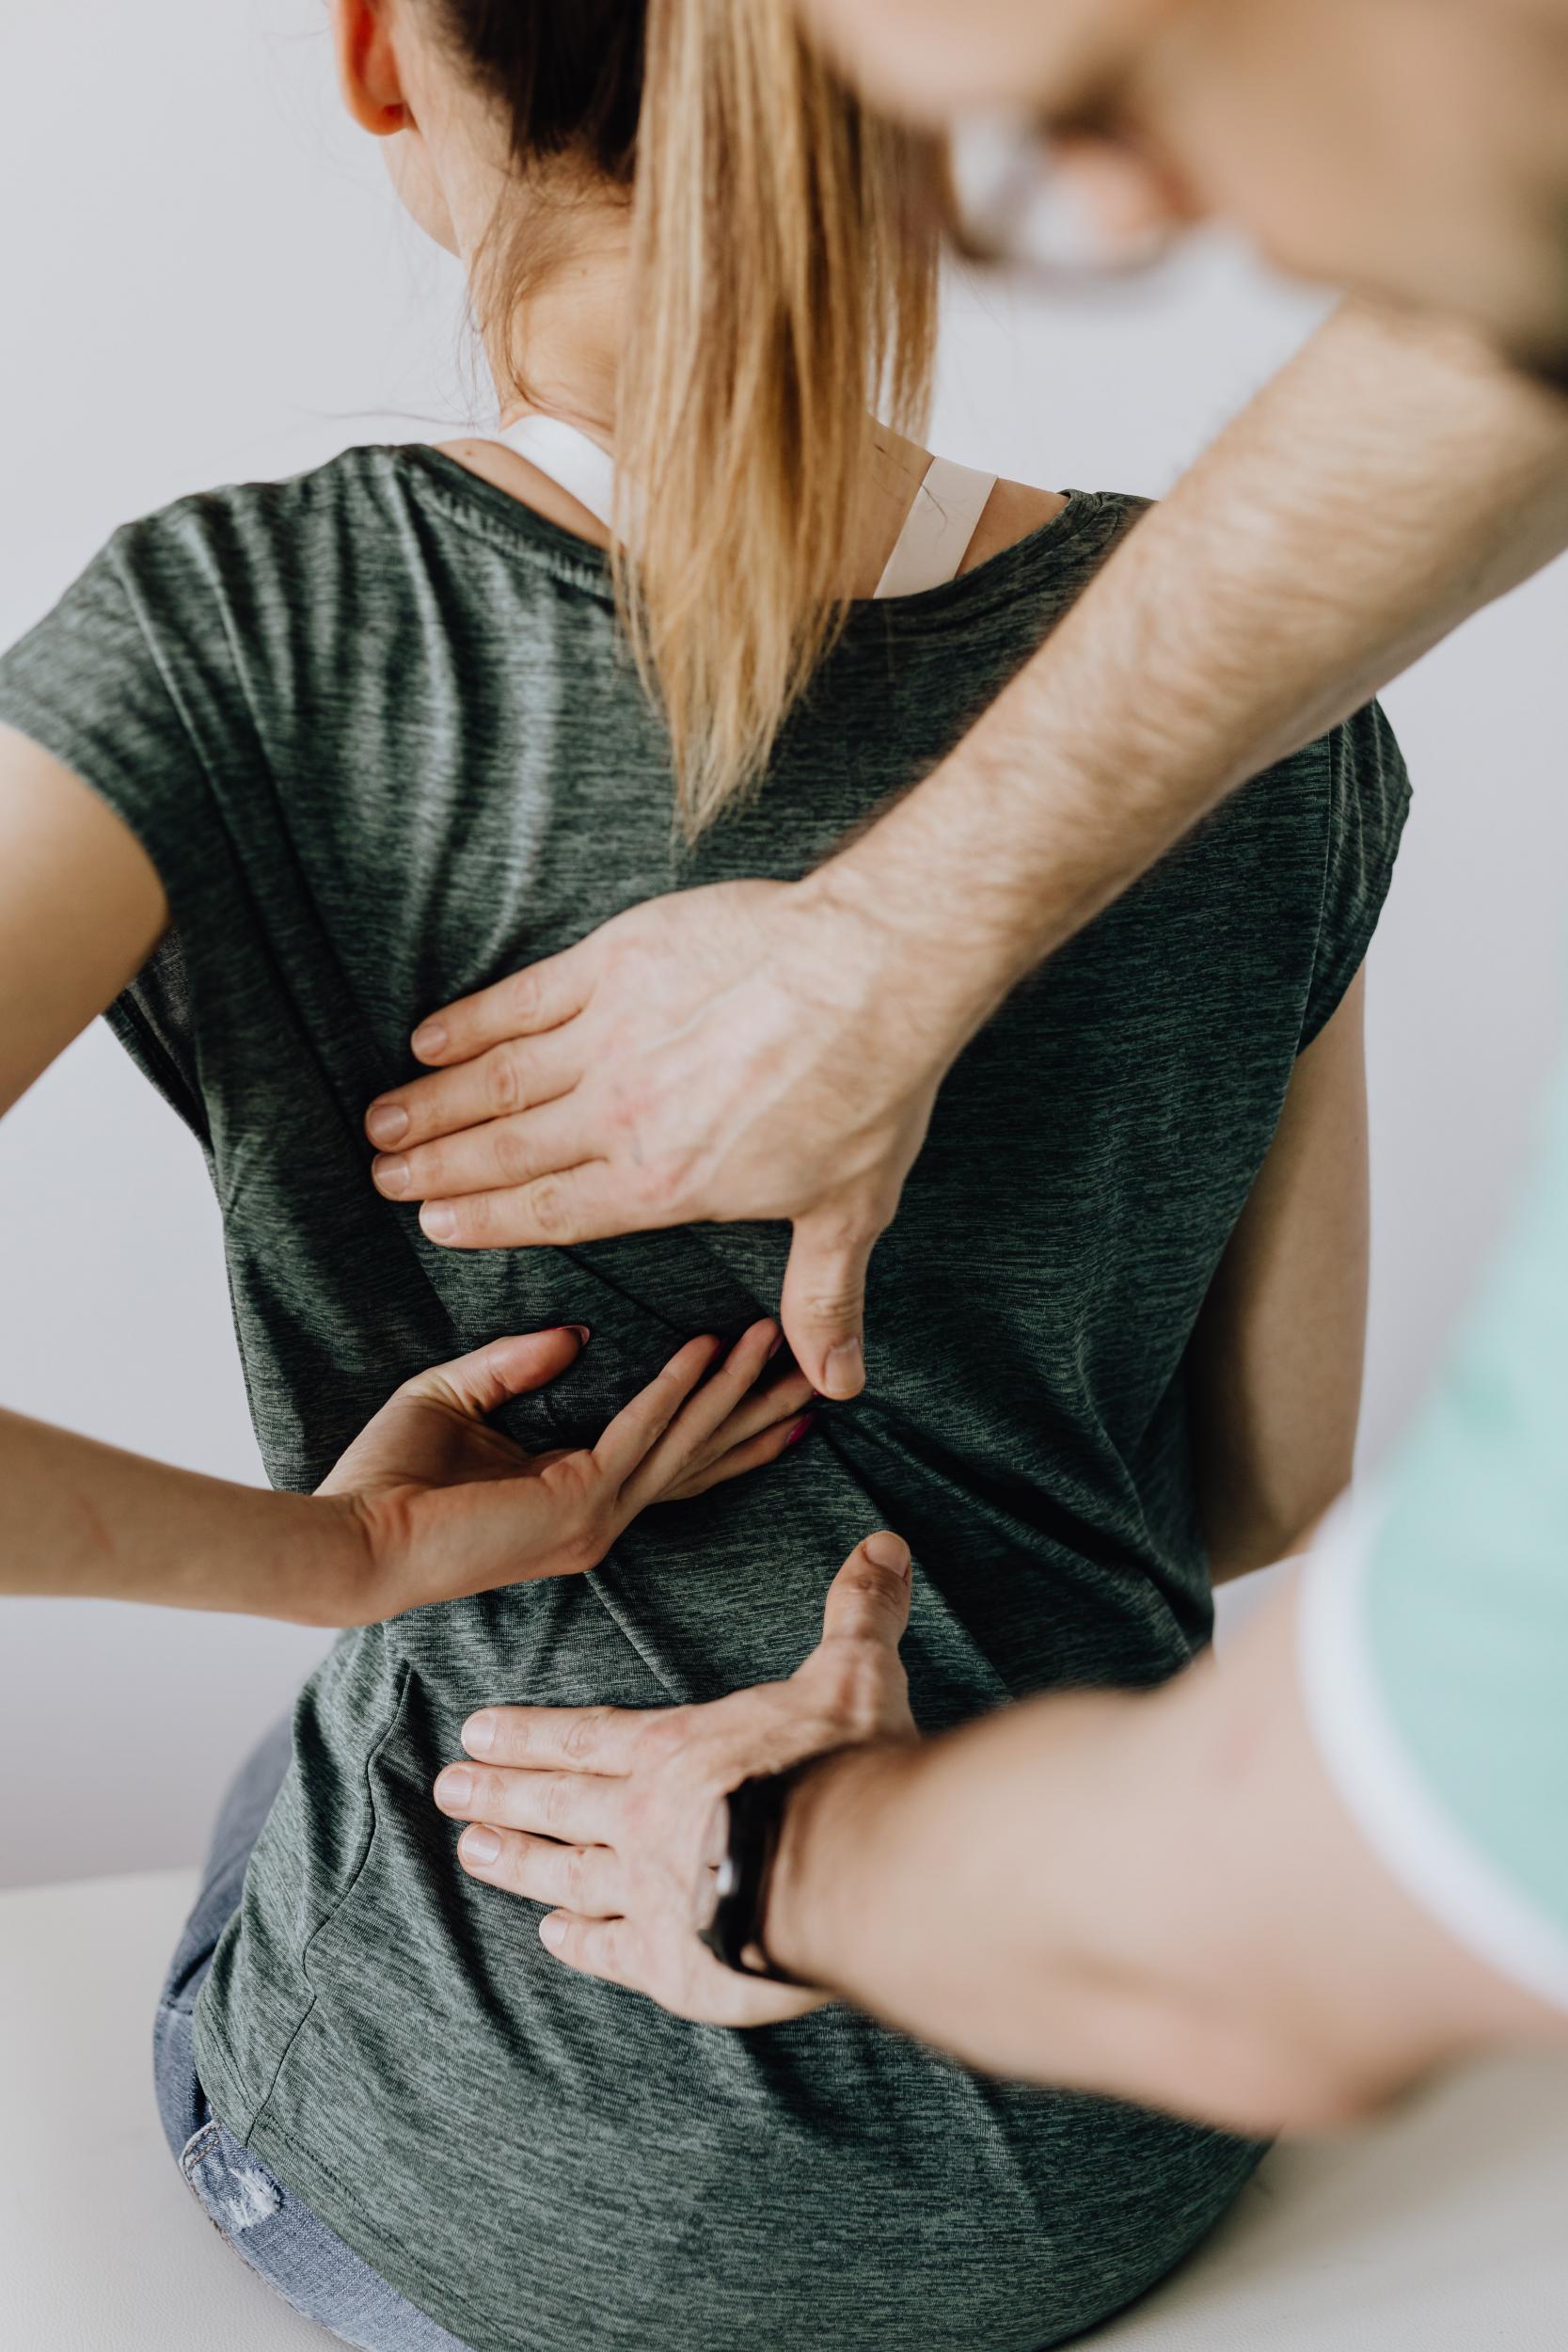 Get Bowen Technique Therapy For Body Aches & Sports Injuries In Manchester, UK